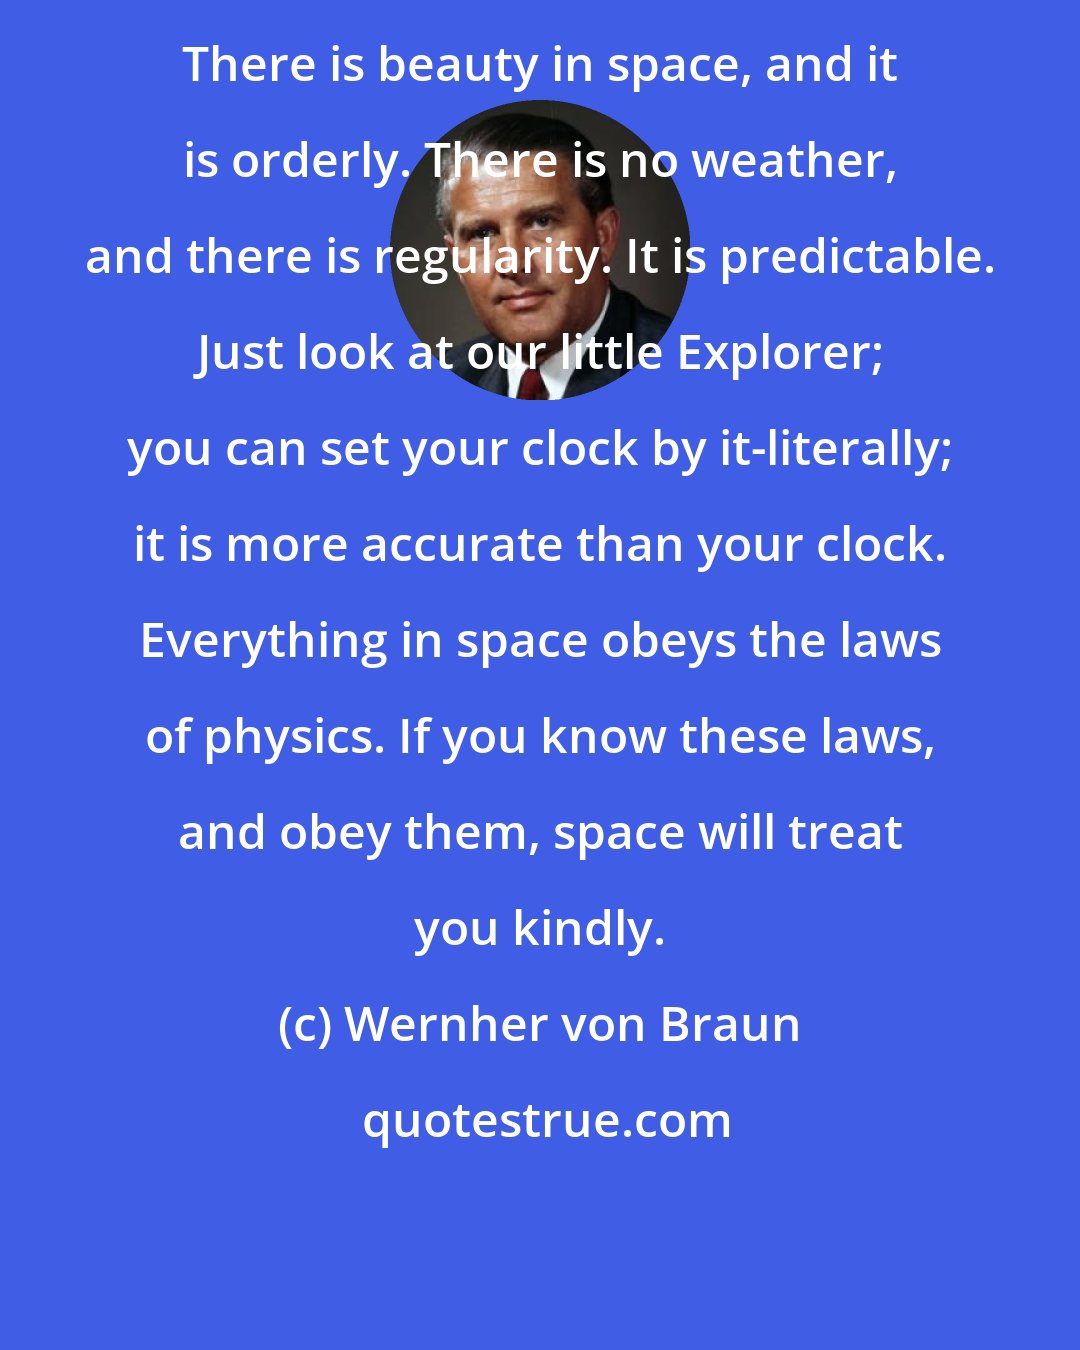 Wernher von Braun: There is beauty in space, and it is orderly. There is no weather, and there is regularity. It is predictable. Just look at our little Explorer; you can set your clock by it-literally; it is more accurate than your clock. Everything in space obeys the laws of physics. If you know these laws, and obey them, space will treat you kindly.